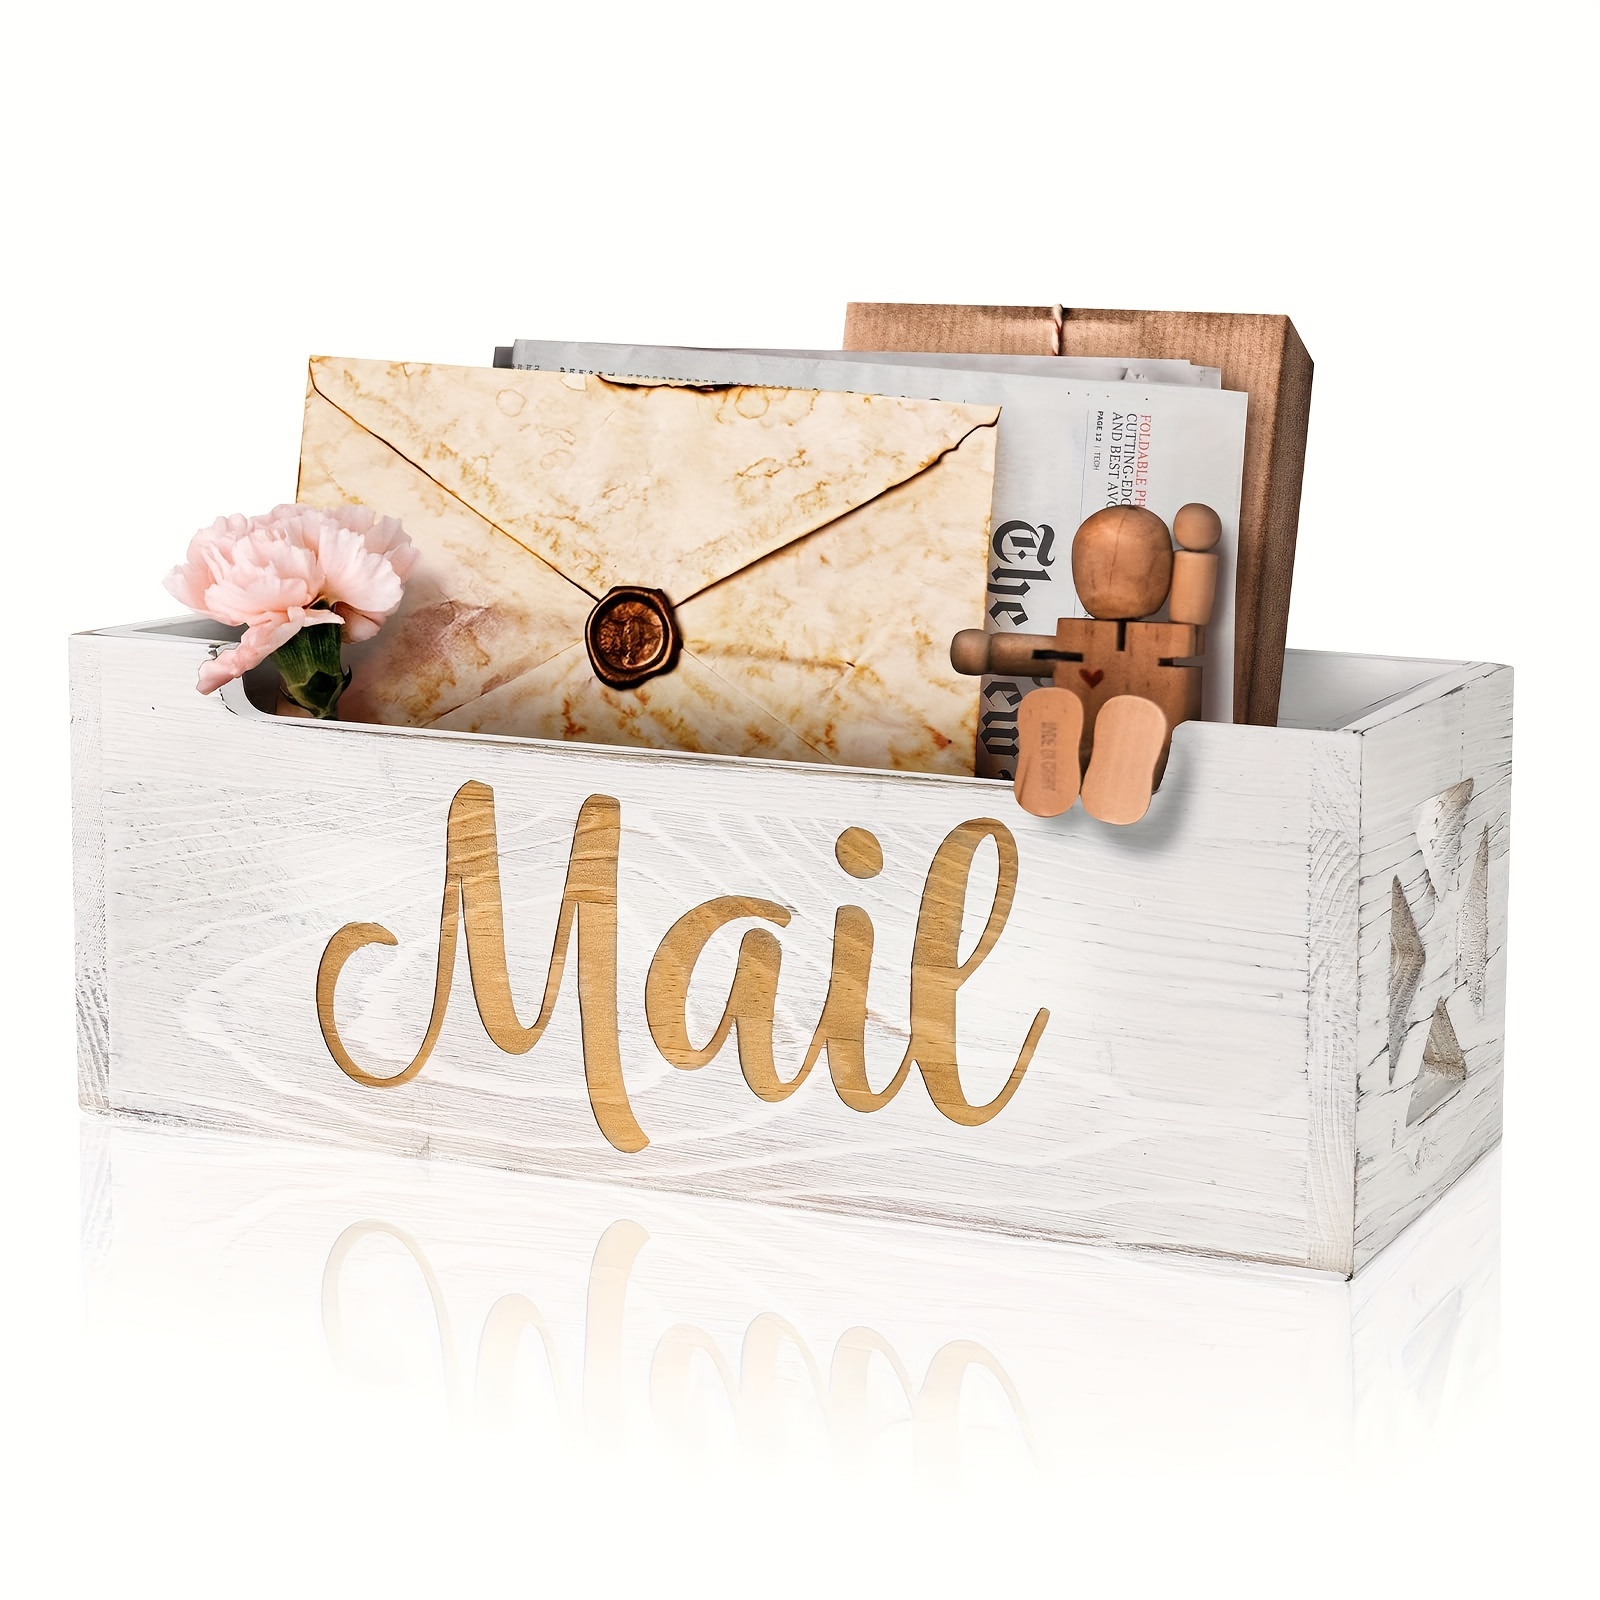 

1pc Rustic Wooden Mail Holder, Wall Mounted Mail Organizer, Countertop Desk Letter Tray, Festive Farmhouse Mail Basket For Home & Office Decor, With 3d "mail" Lettering